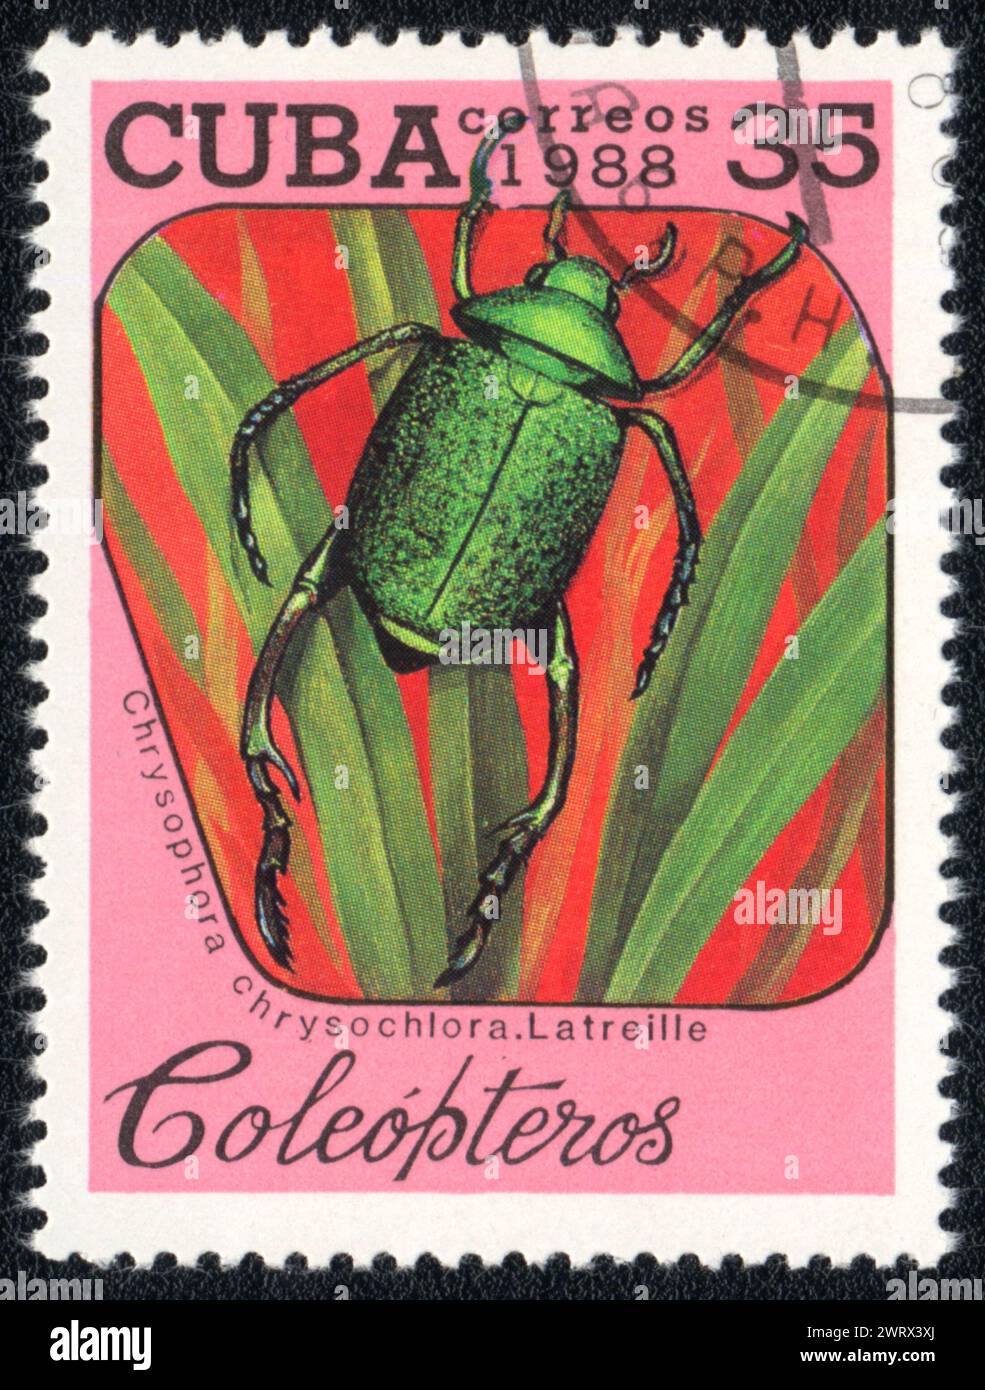 Postage stamp printed in CUBA shows image of a  scarab Shining leaf chafer beetle (Chrysophora chrysochlora. Latreille) beetle, from series - entomofa Stock Photo